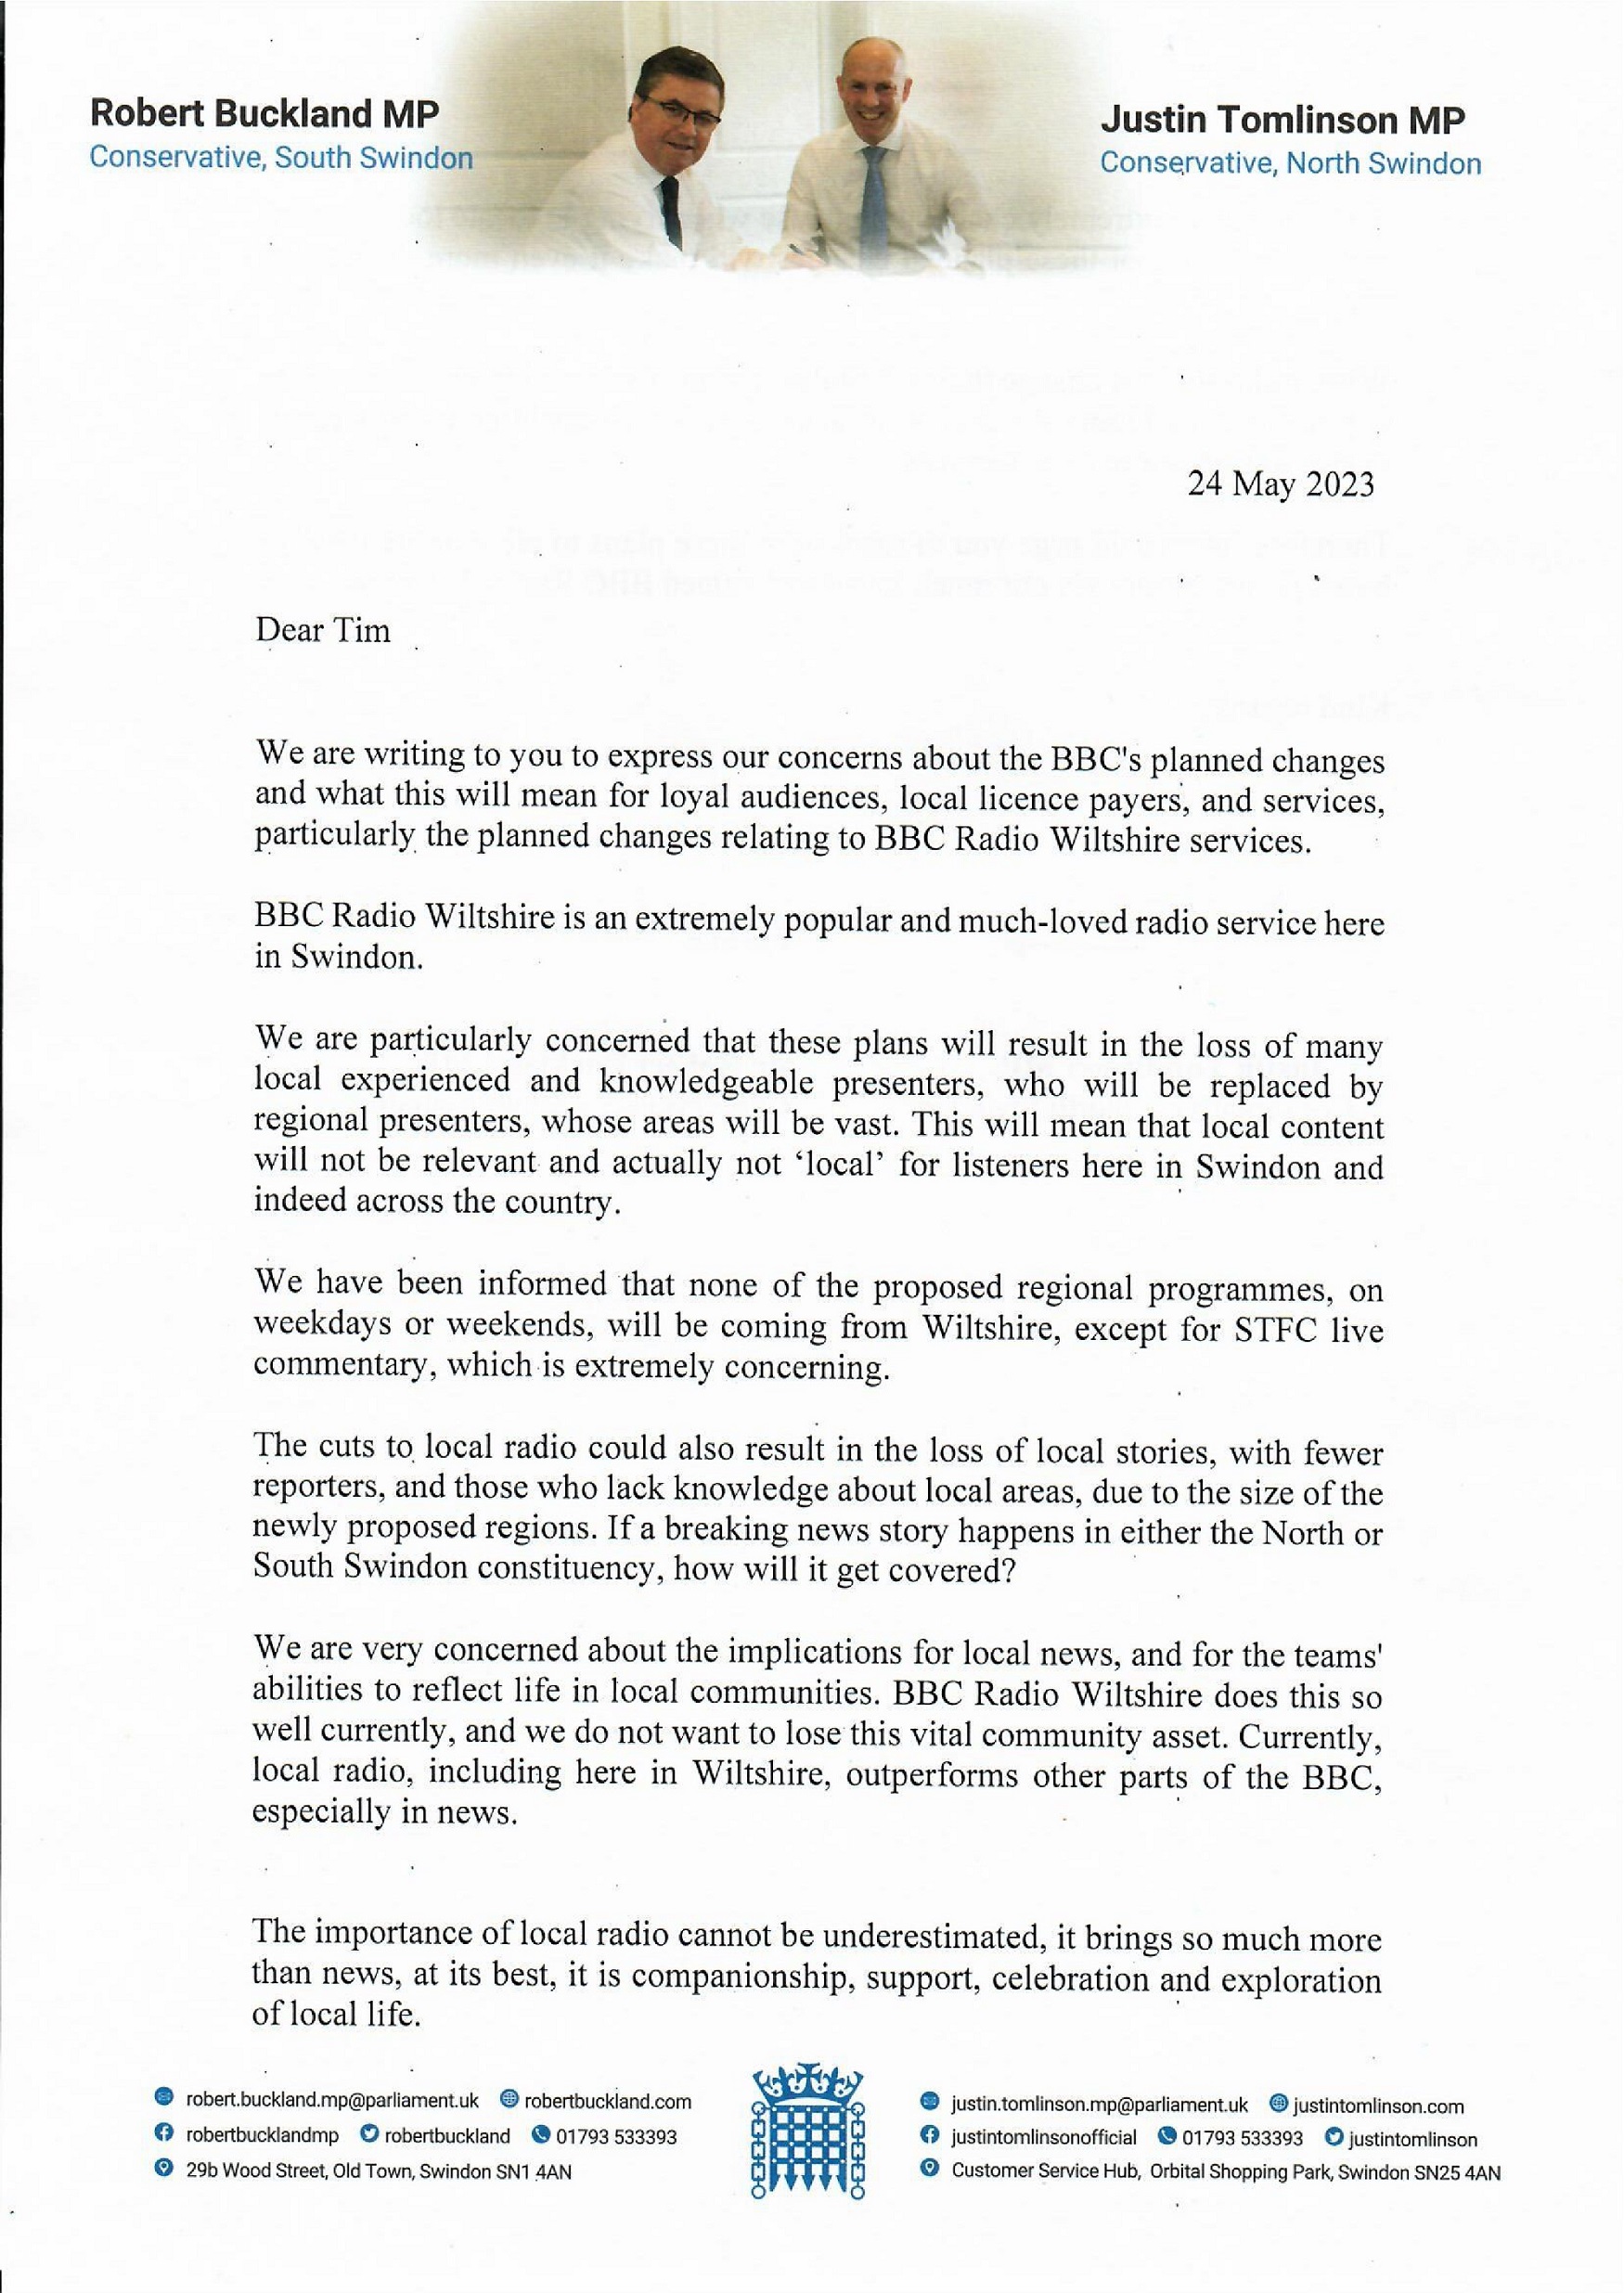 Justin and Robert Write To BBC Director General Regarding Changed To Local Radio